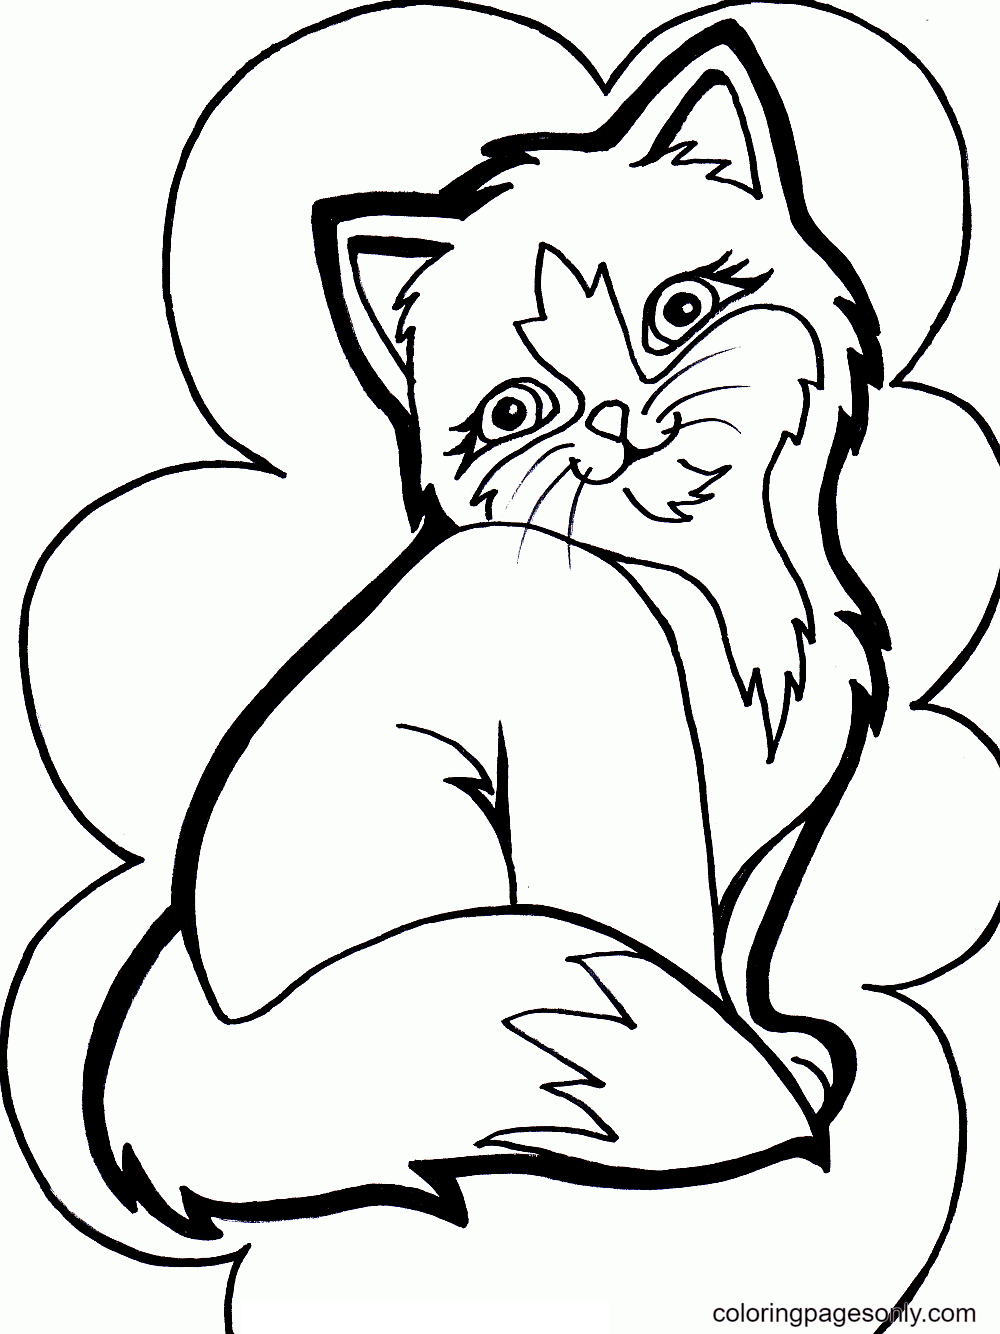 Kitten Have Amazing Fur Coloring Pages - Kitten Coloring Pages - Coloring  Pages For Kids And Adults